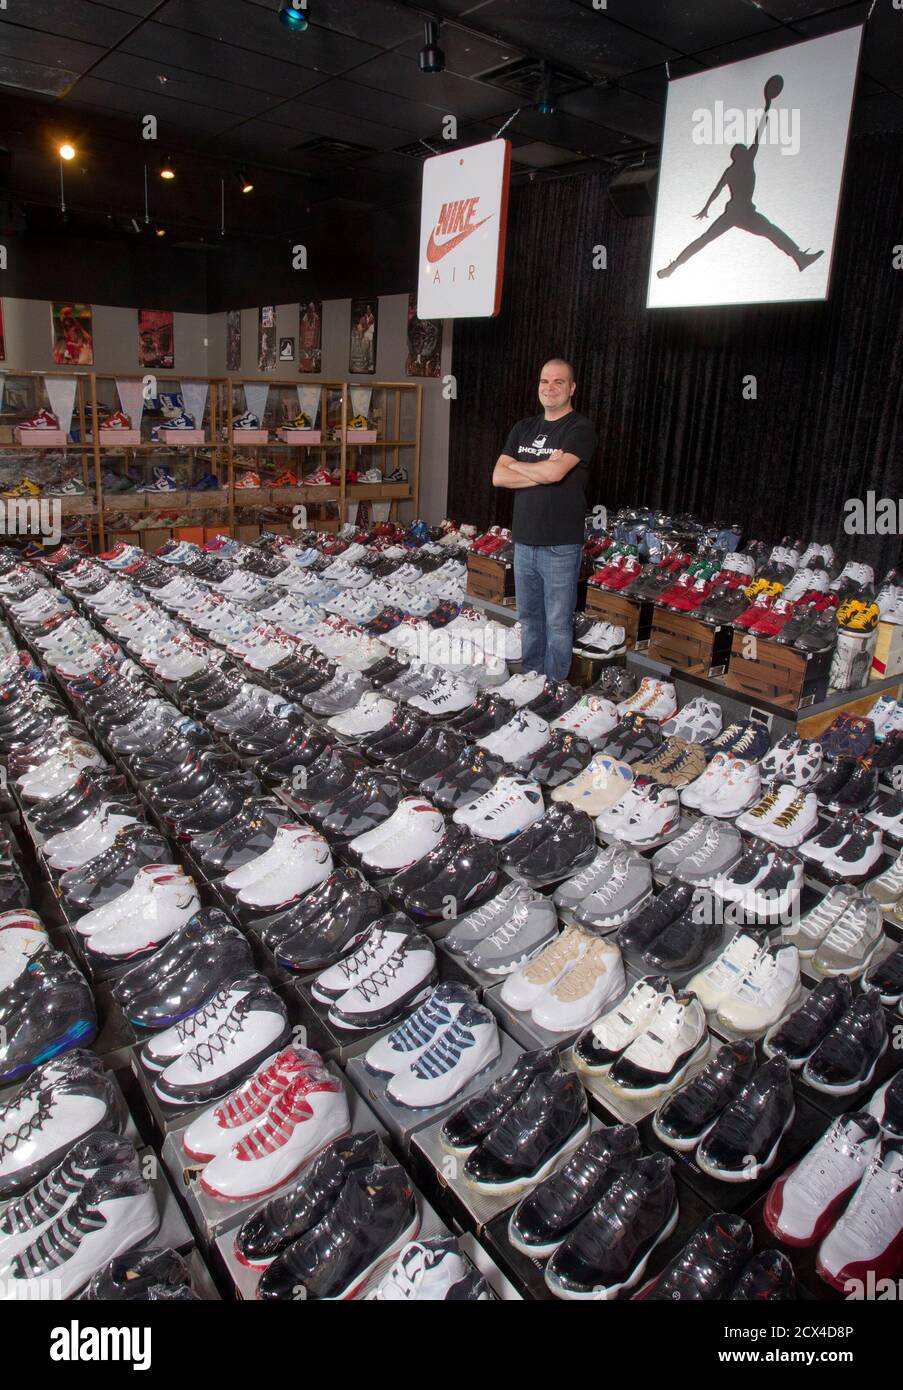 Jordan Michael Geller poses with his collection of the Nike Air Jordan  Retro line at the "ShoeZeum" in downtown Las Vegas, Nevada September 25,  2012. Record keepers at the Guinness Book of